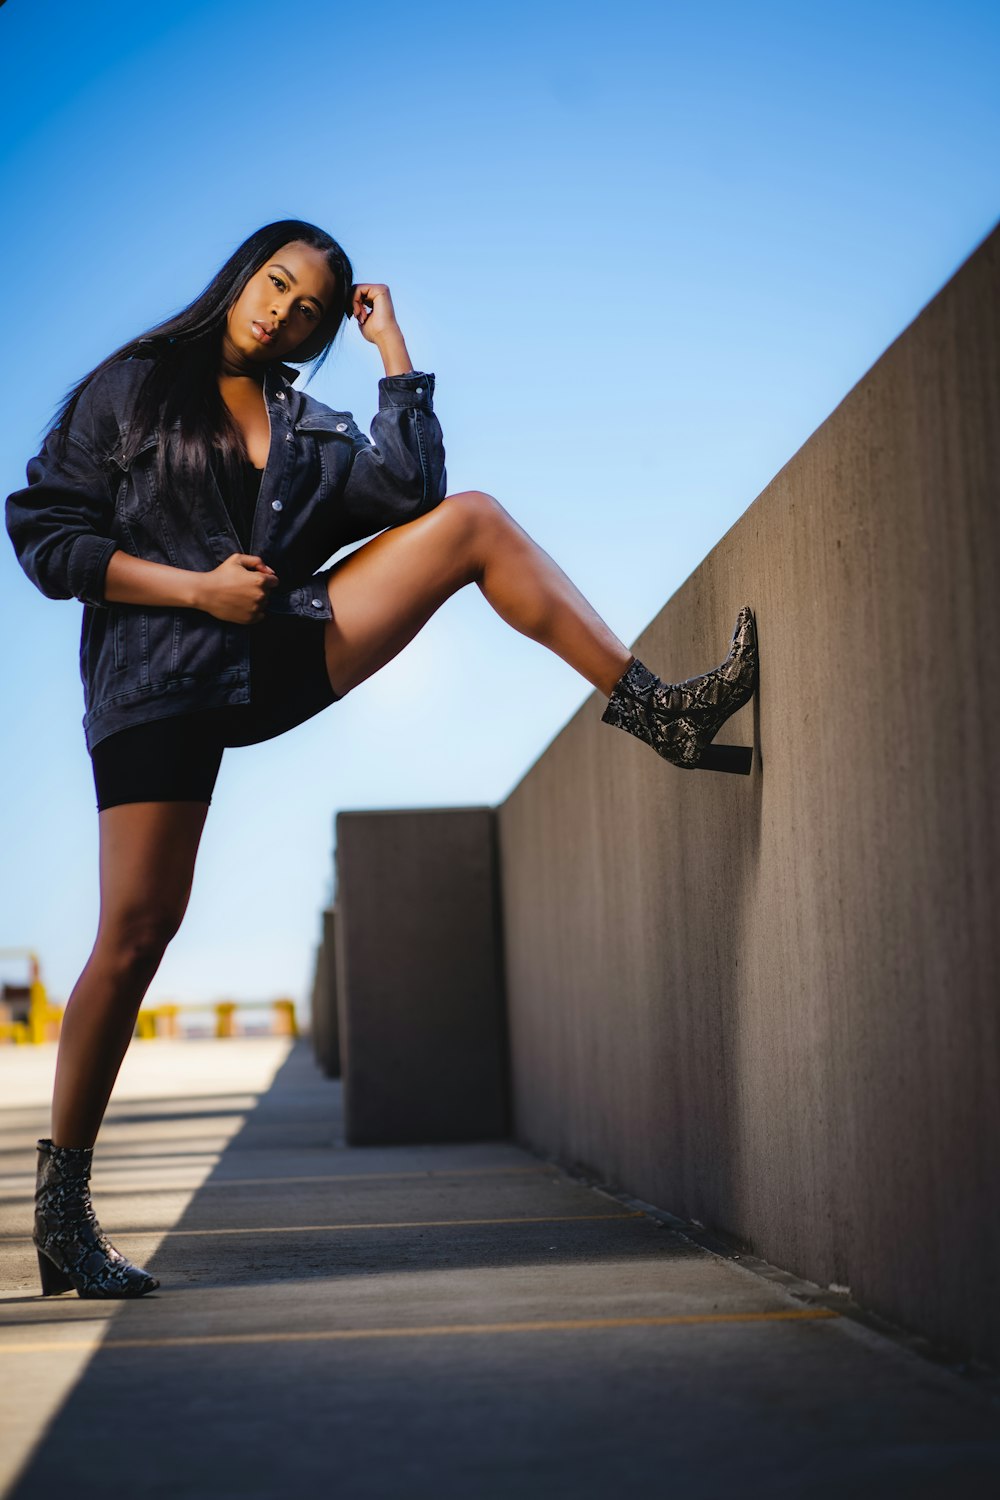 a woman leaning against a wall while wearing high heels